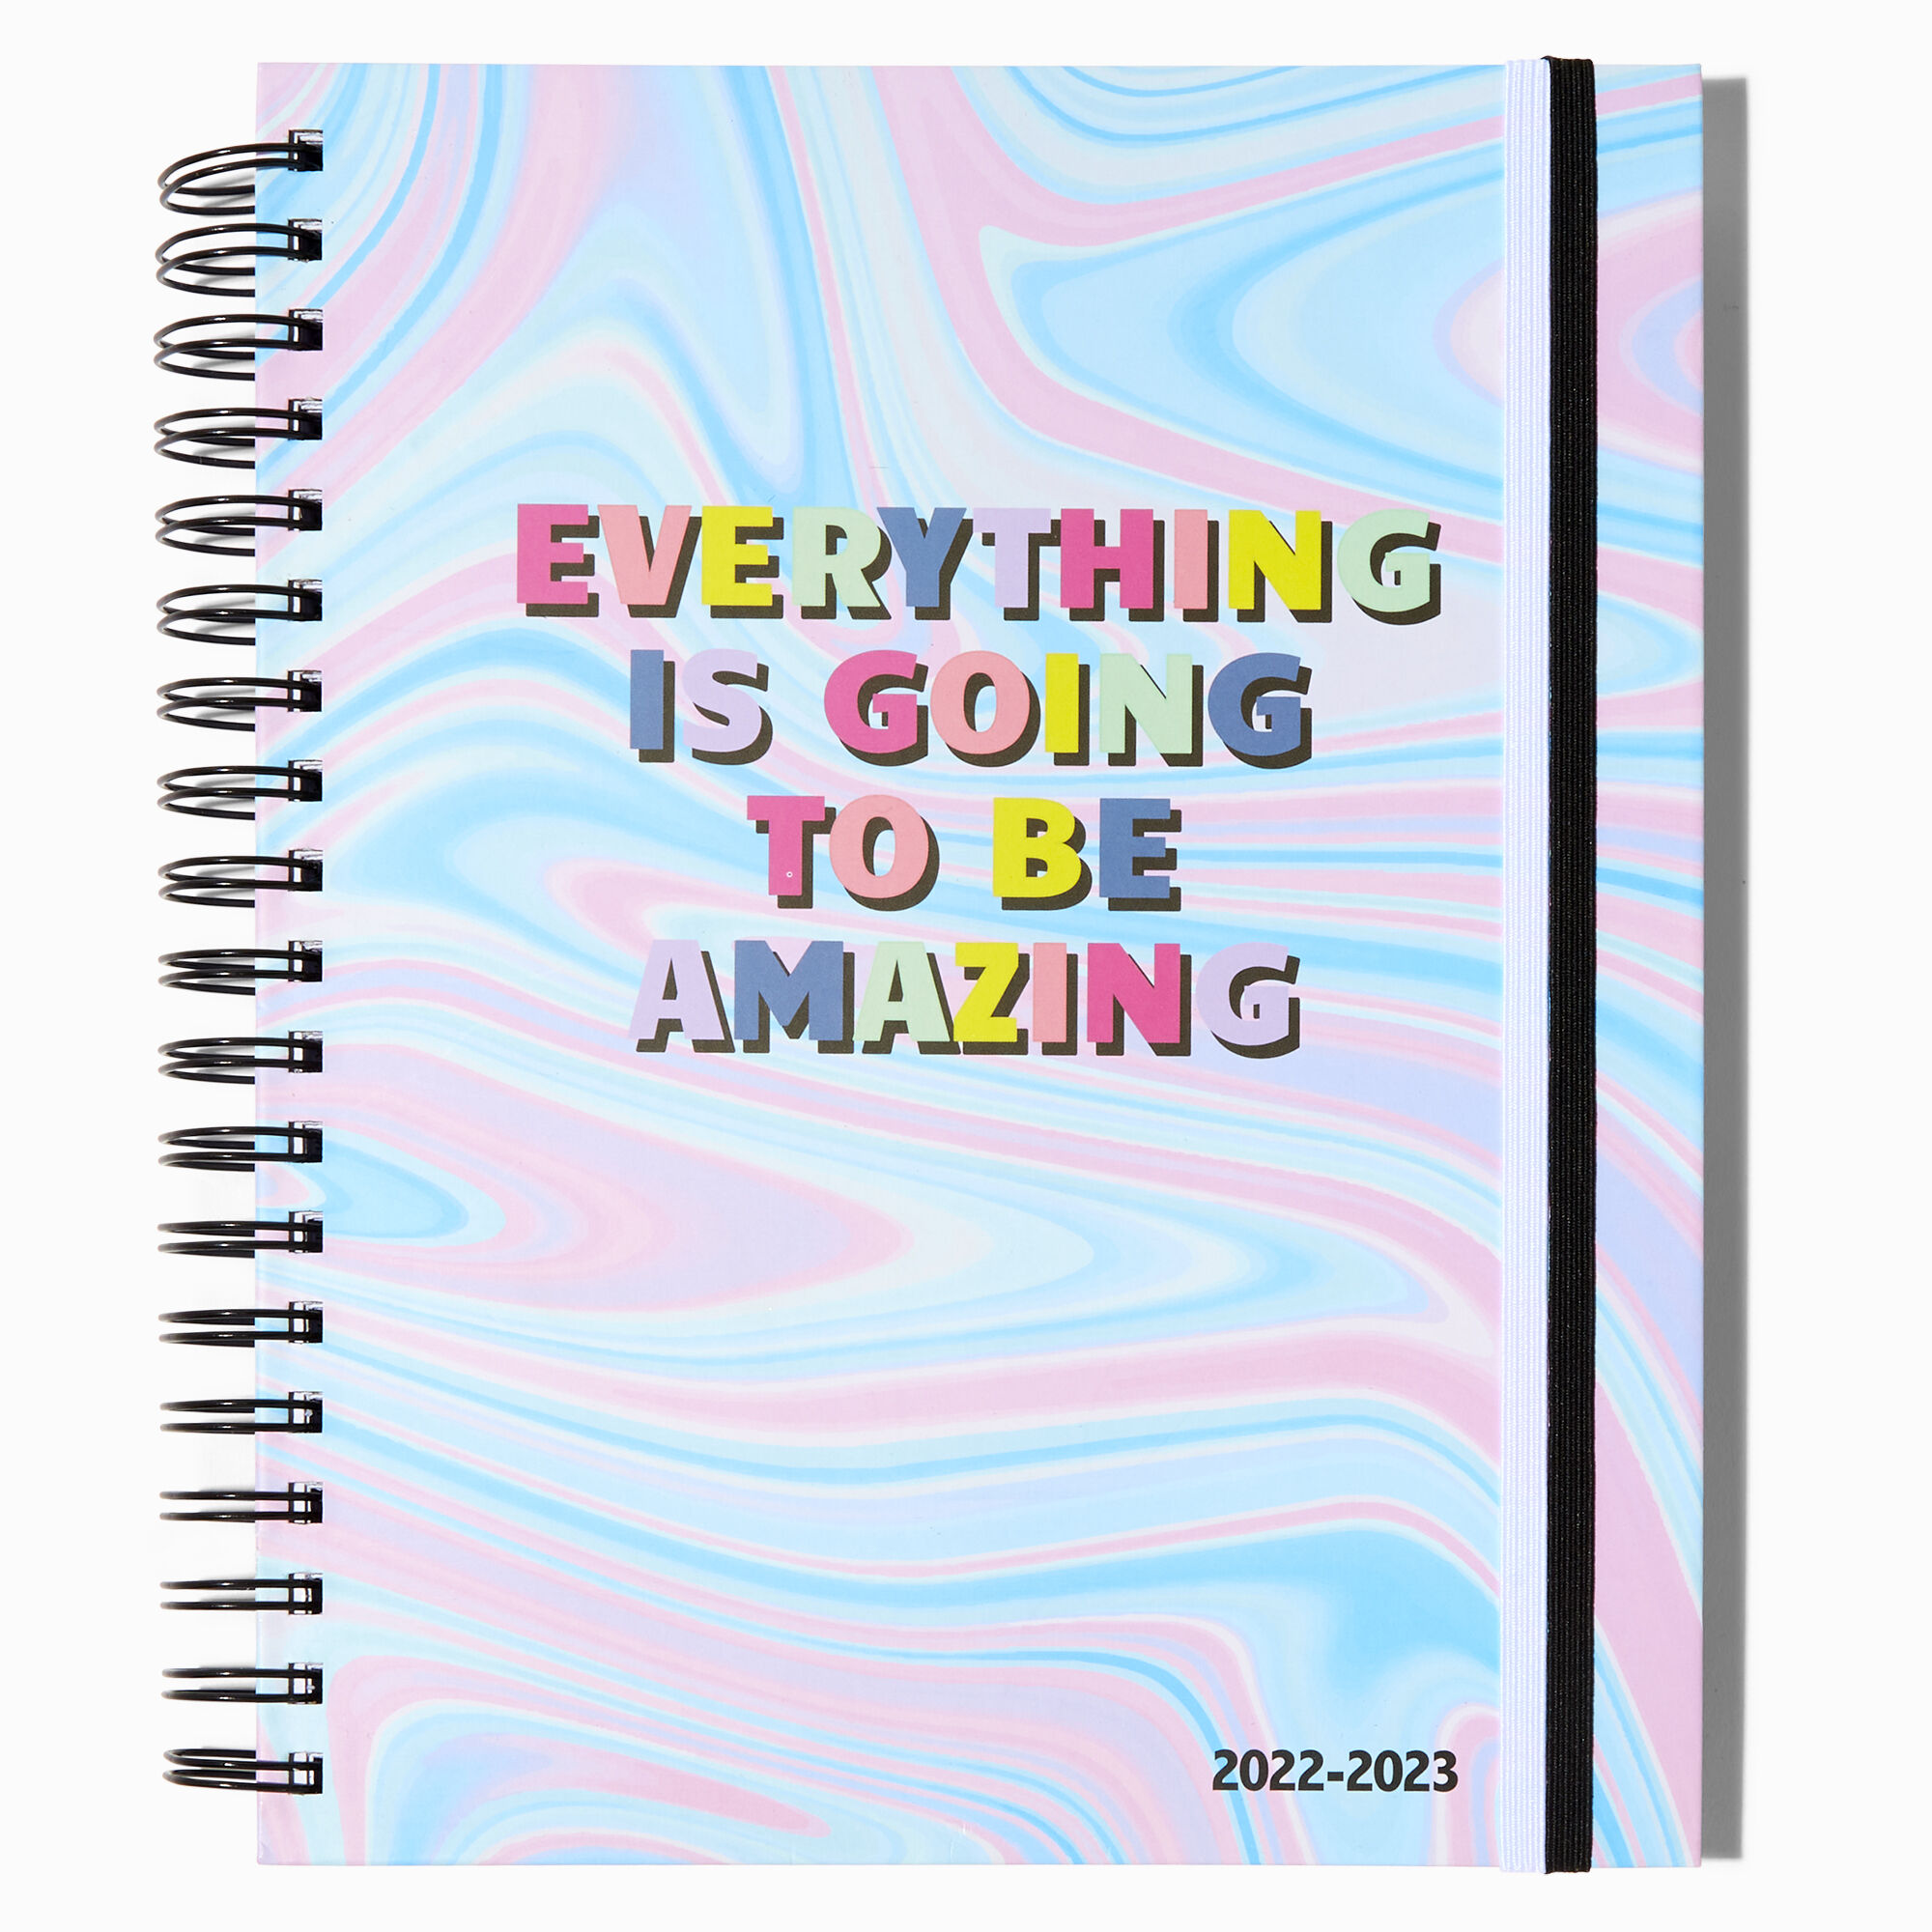 View Claires Amazing Year 2023 Spiral Planner information